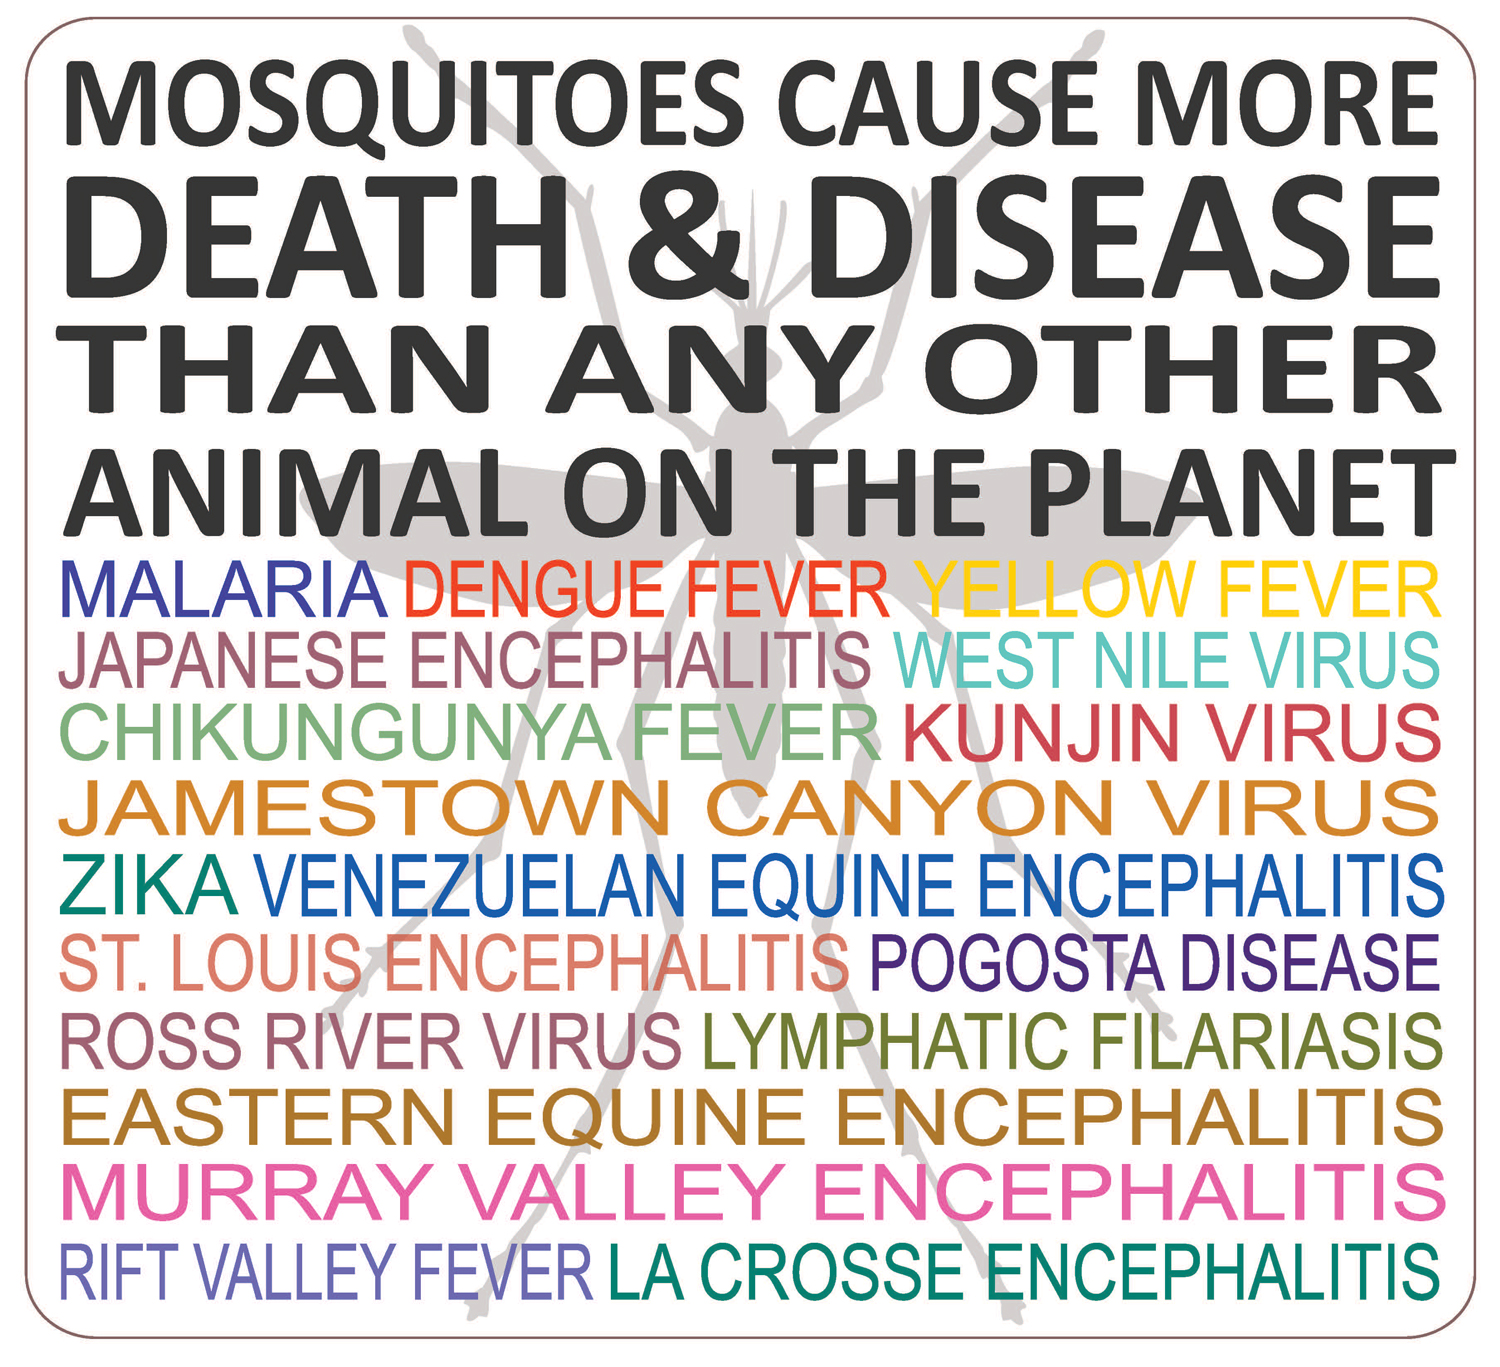 Mosquitoes cause more death and disease than any other animal on the planet